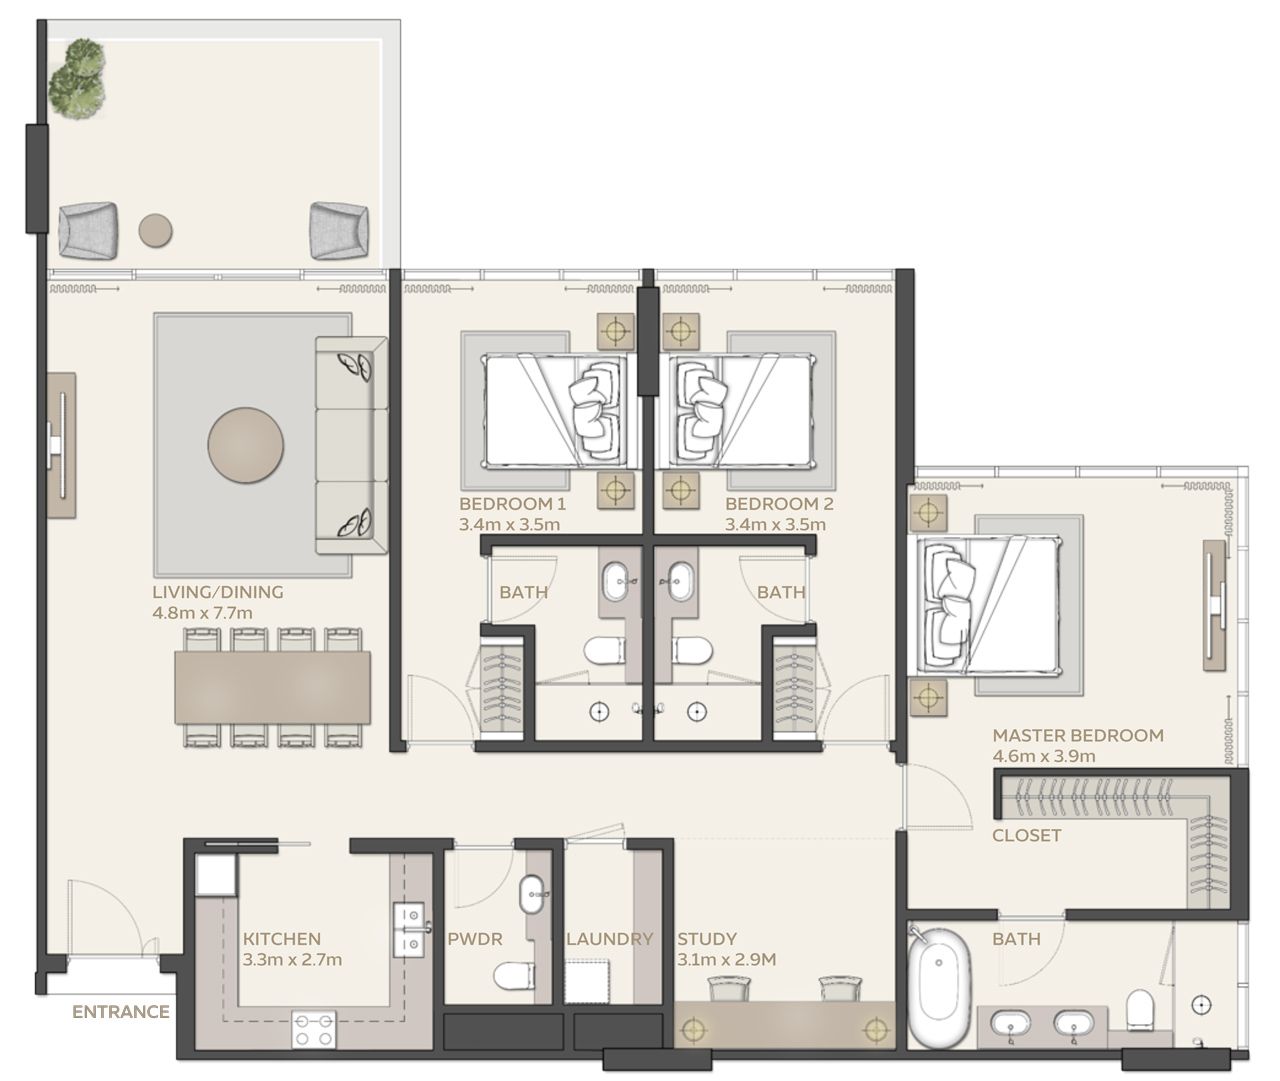 Mangrove Residences At Expo City 3 bedrooms floor plan